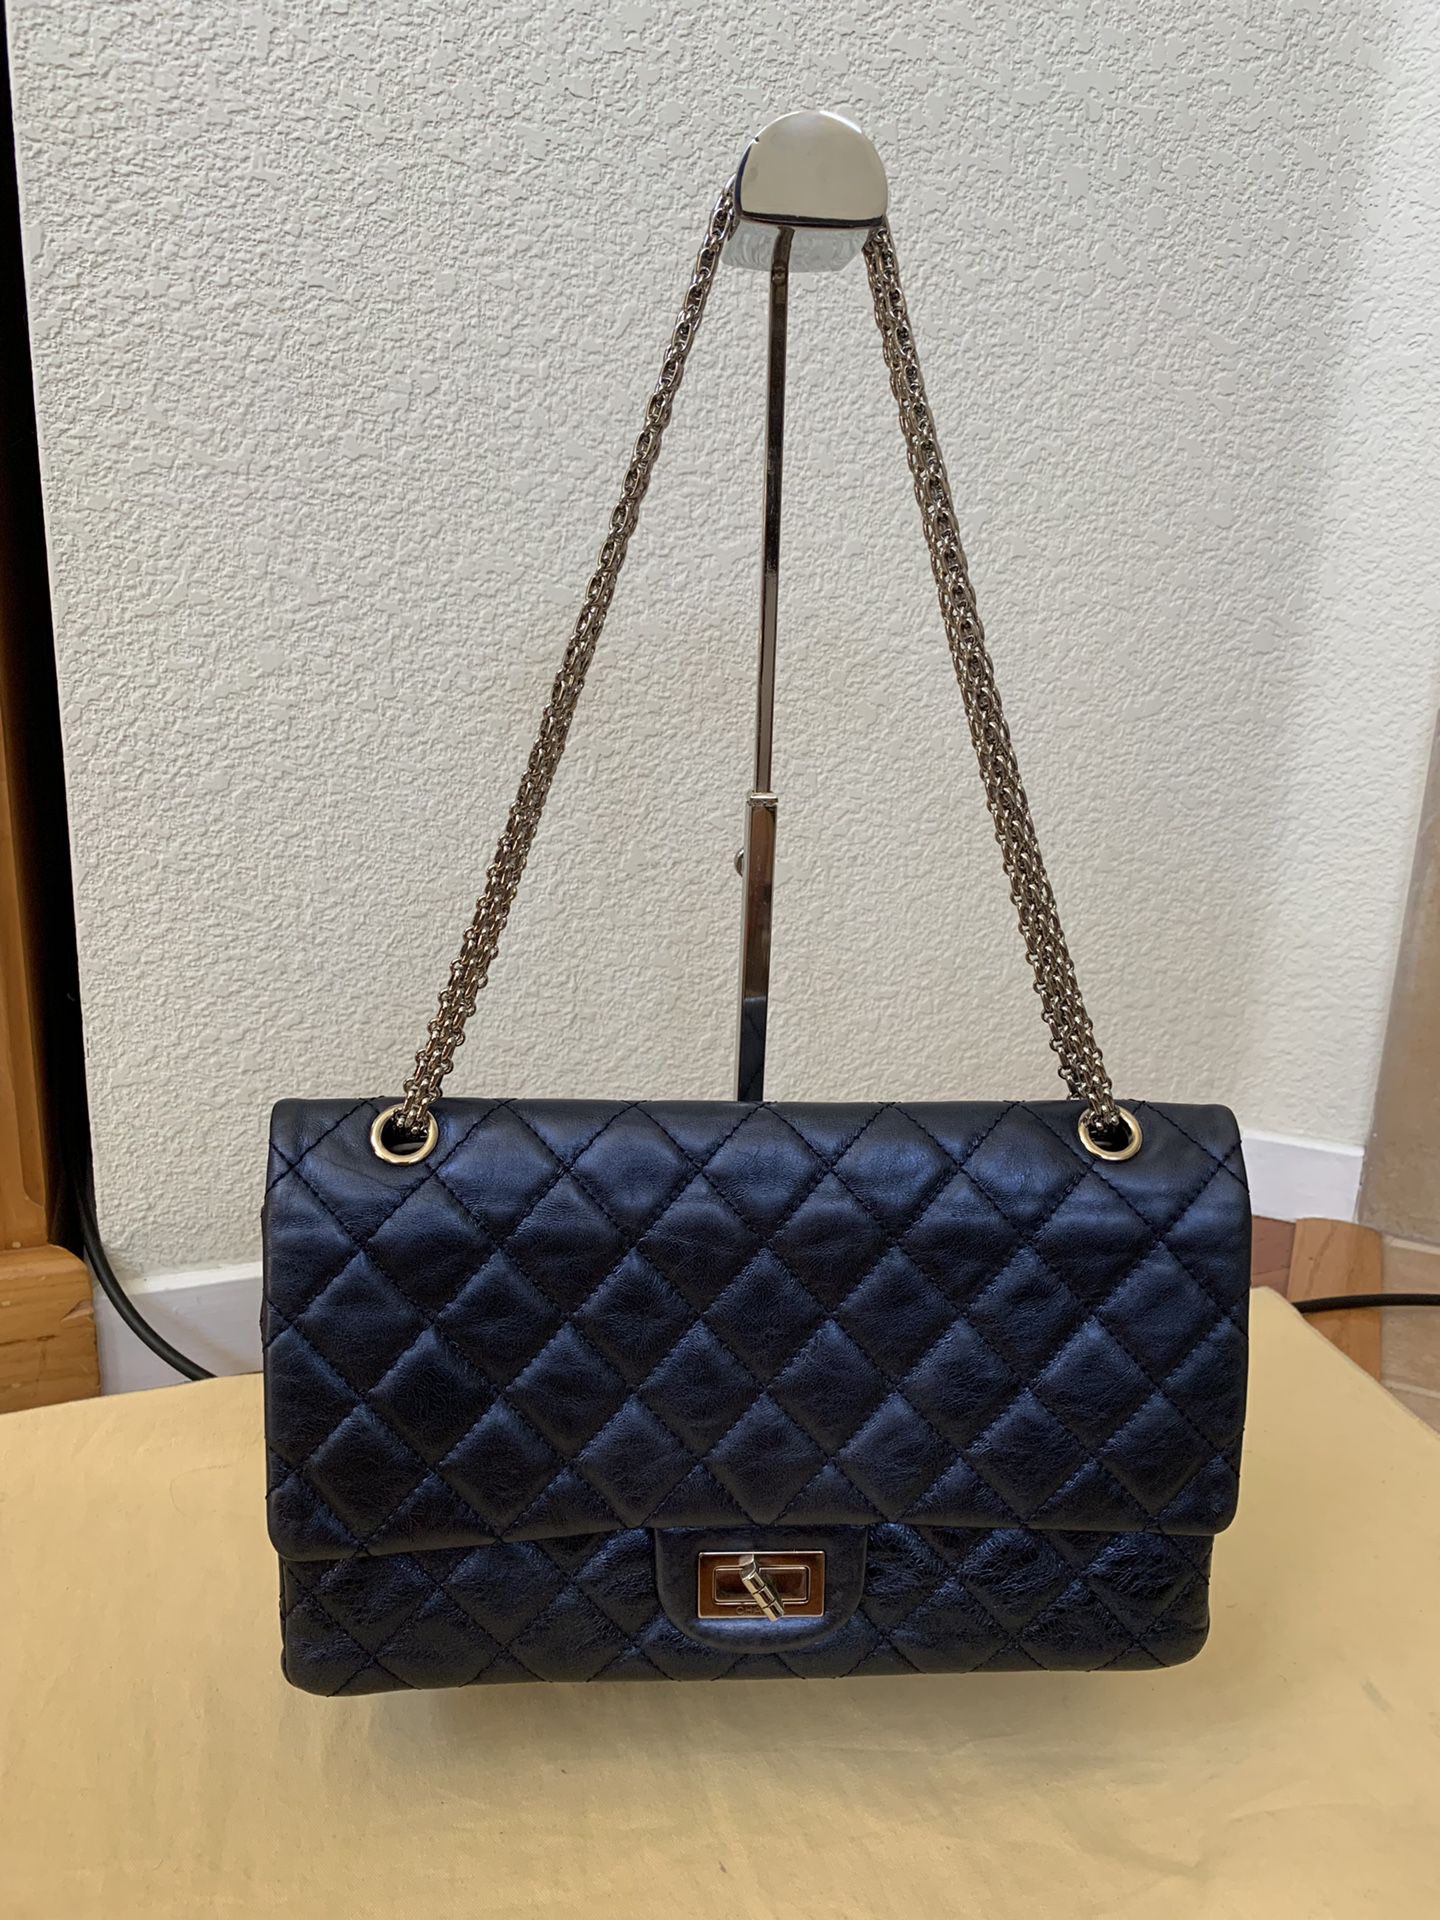 Like new Authentic Chanel Blue Metalic Reissue flap bag